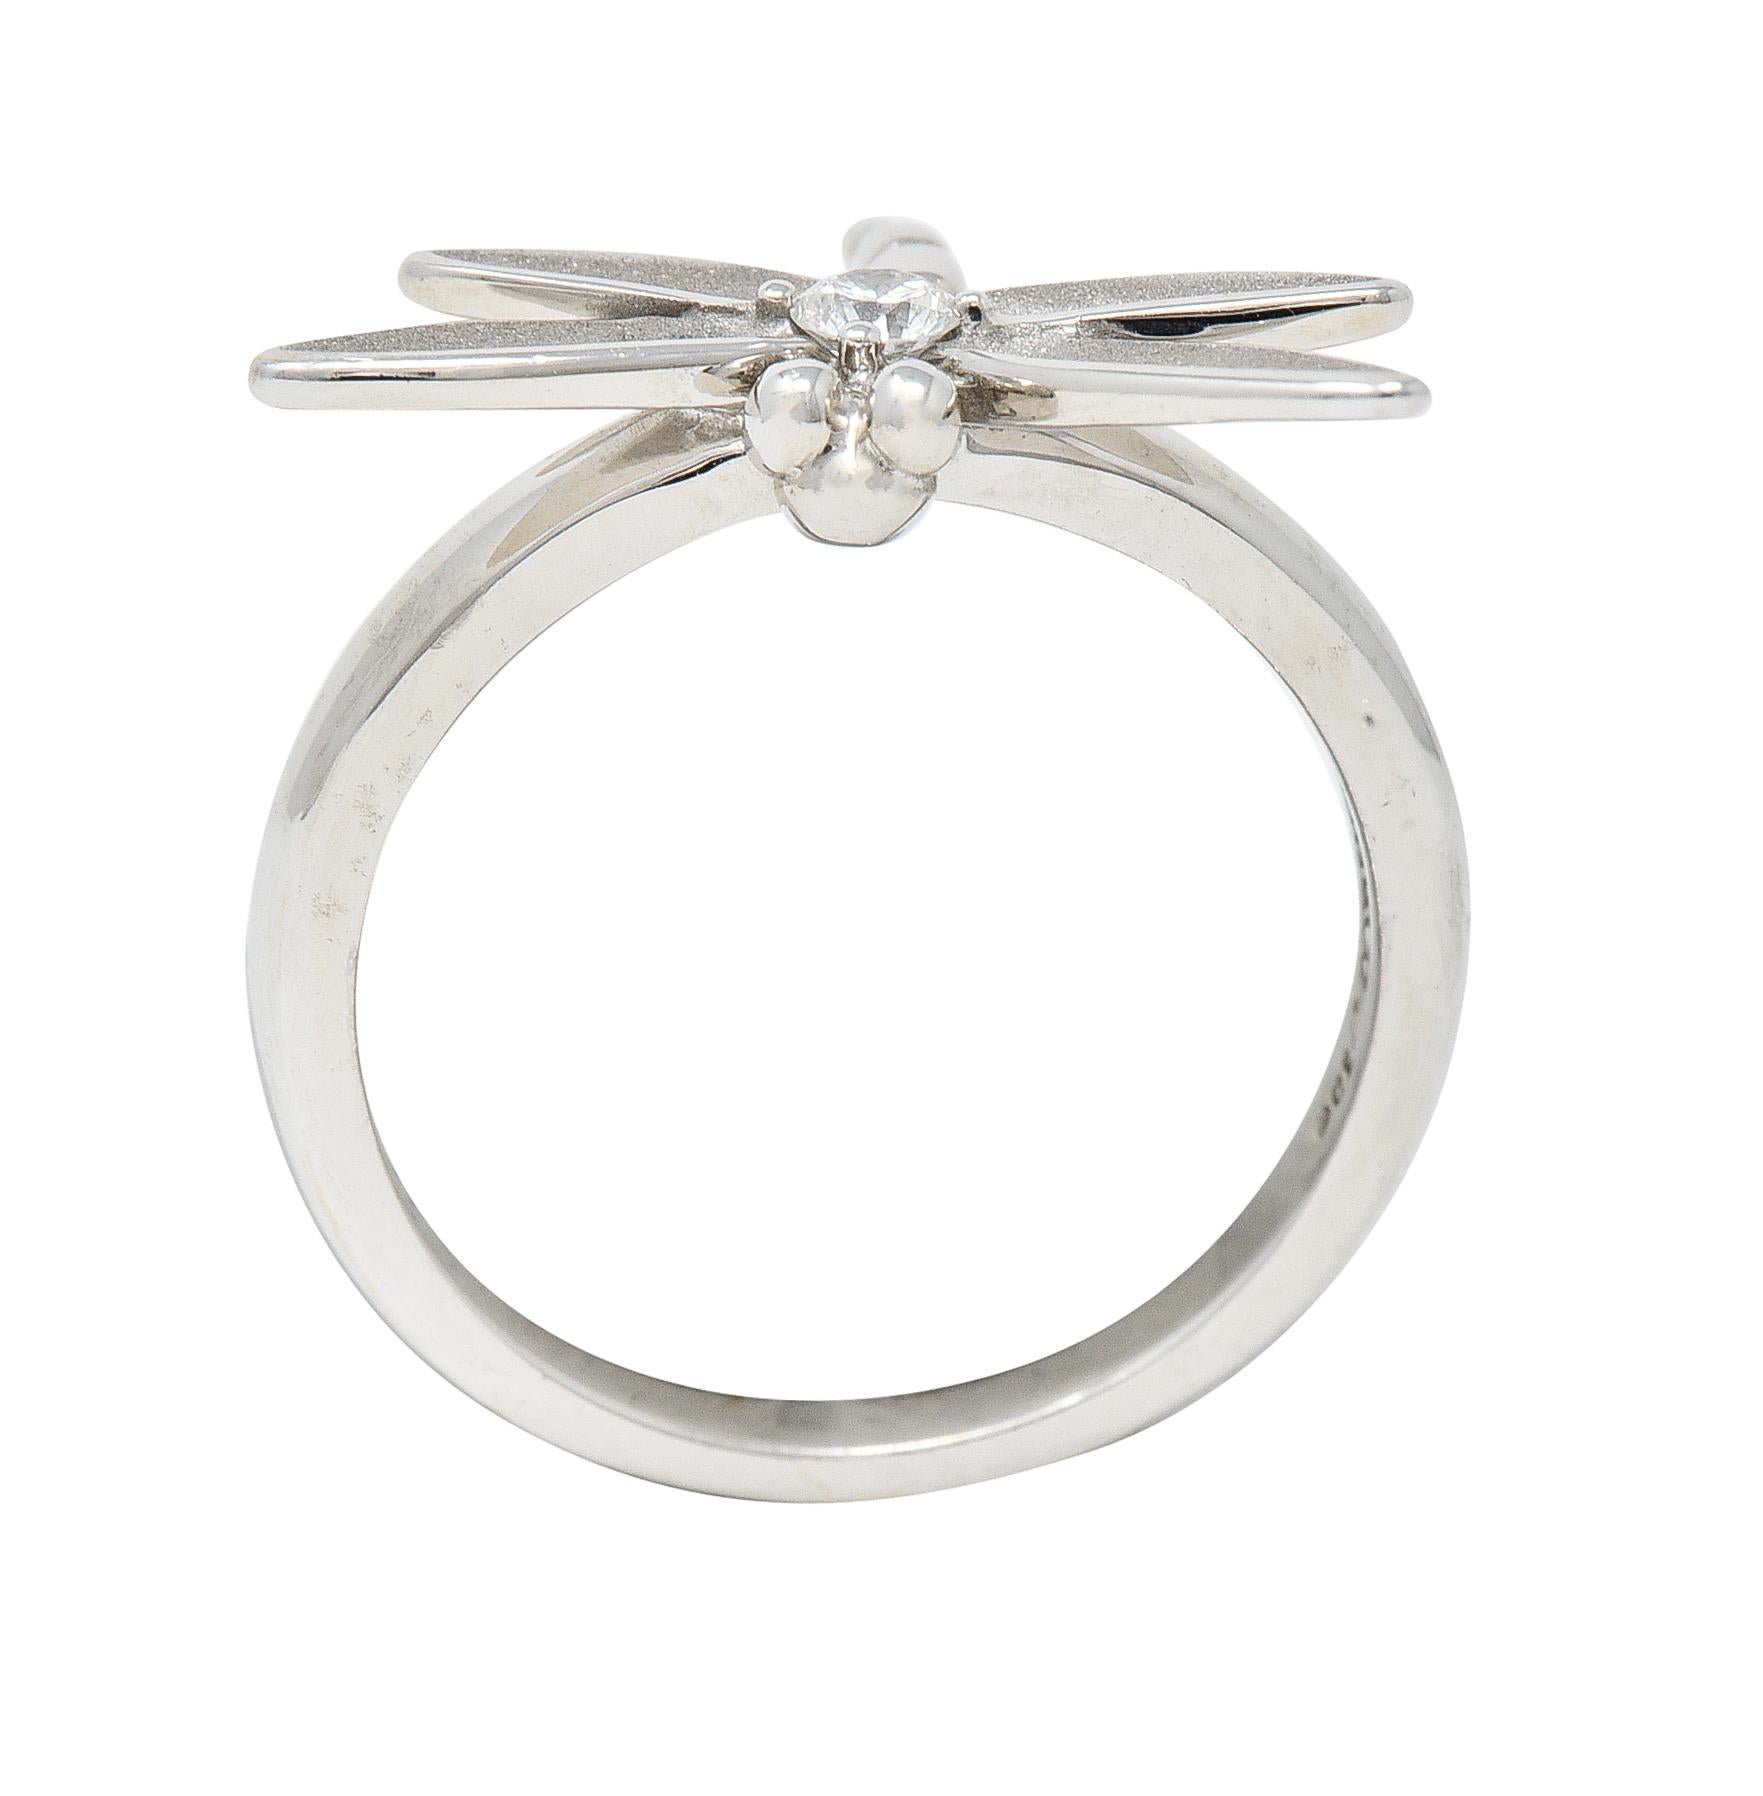 Tiffany & Co. 2000s Diamond White Gold Dragonfly Ring In Excellent Condition For Sale In Philadelphia, PA